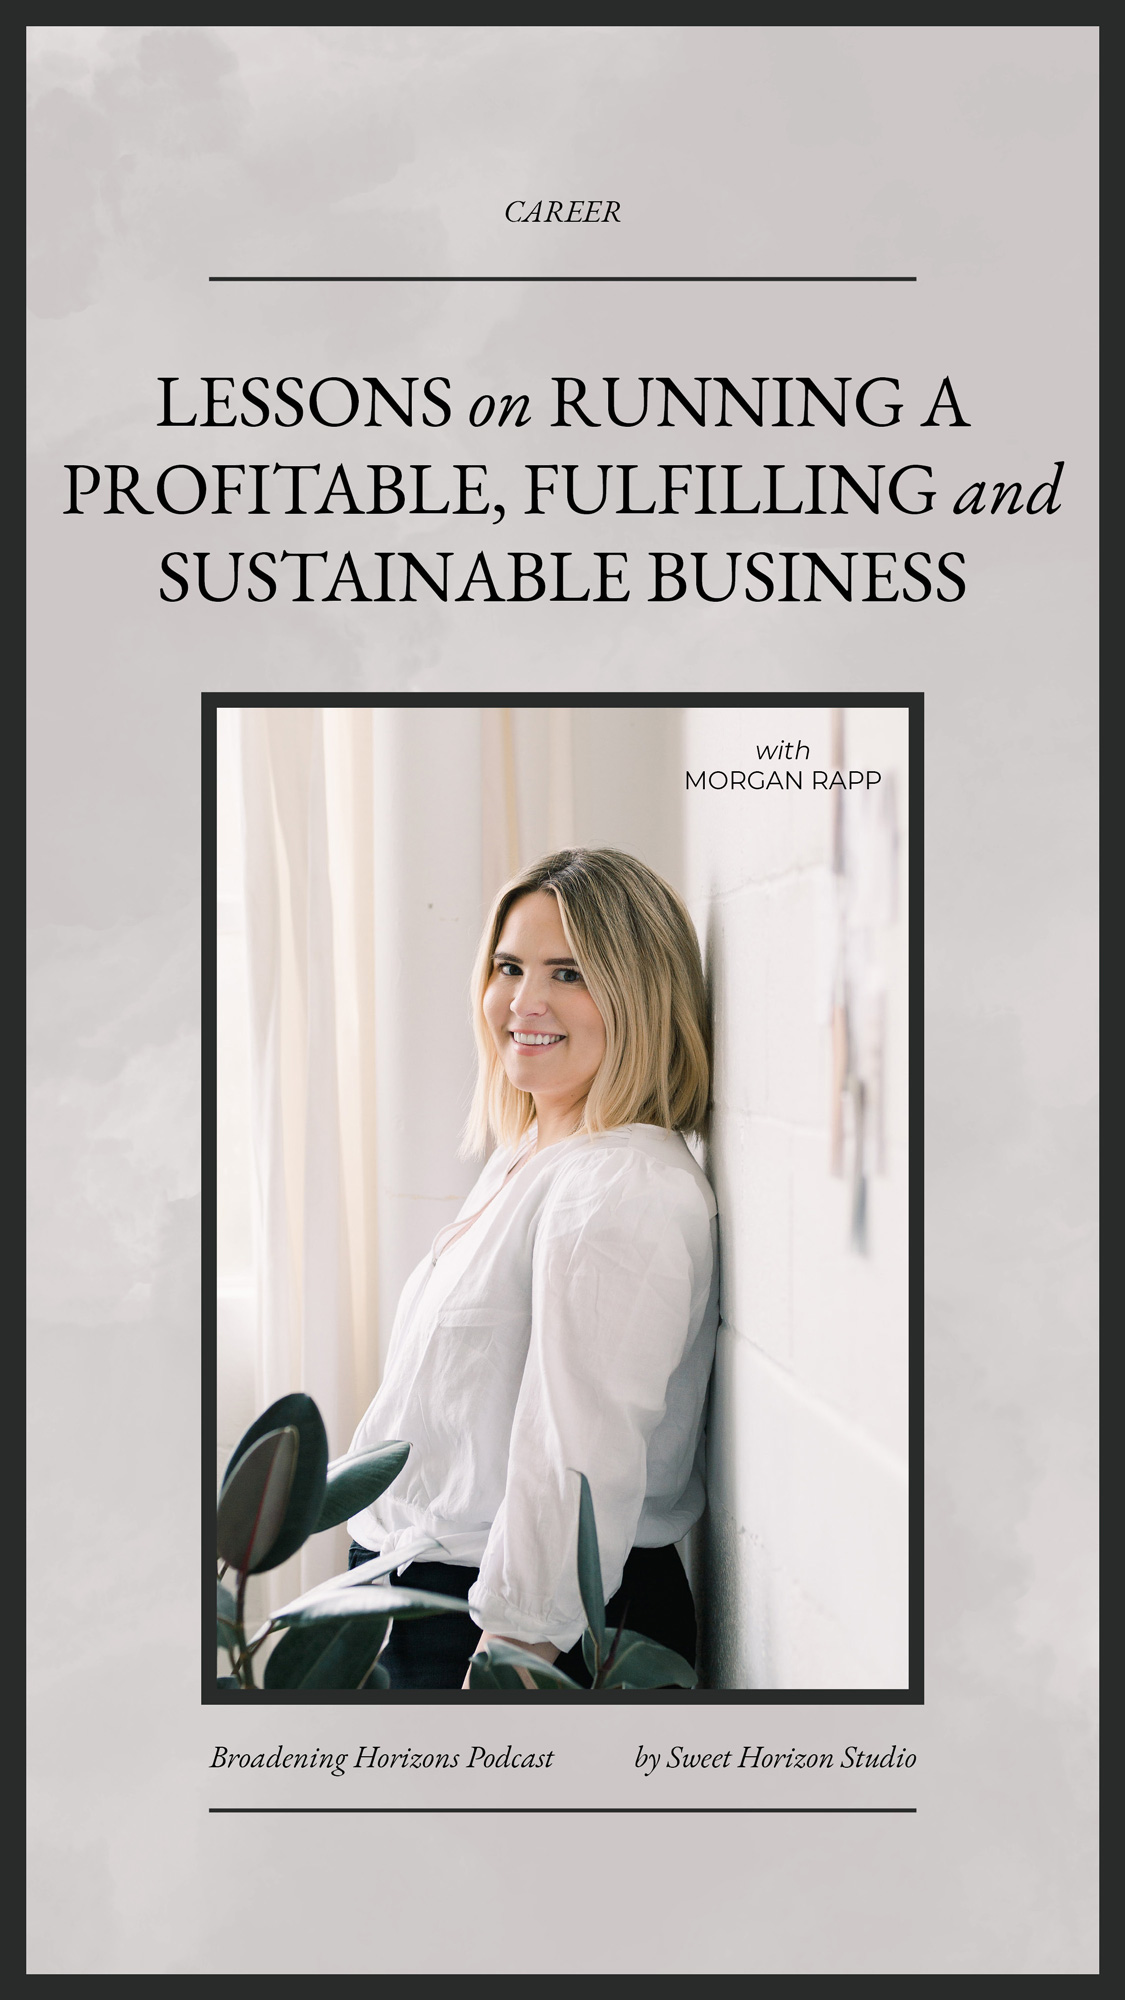 Lessons on Running a Profitable, Fulfilling, and Sustainable Business with Morgan Rapp from www.sweethorizonblog.com